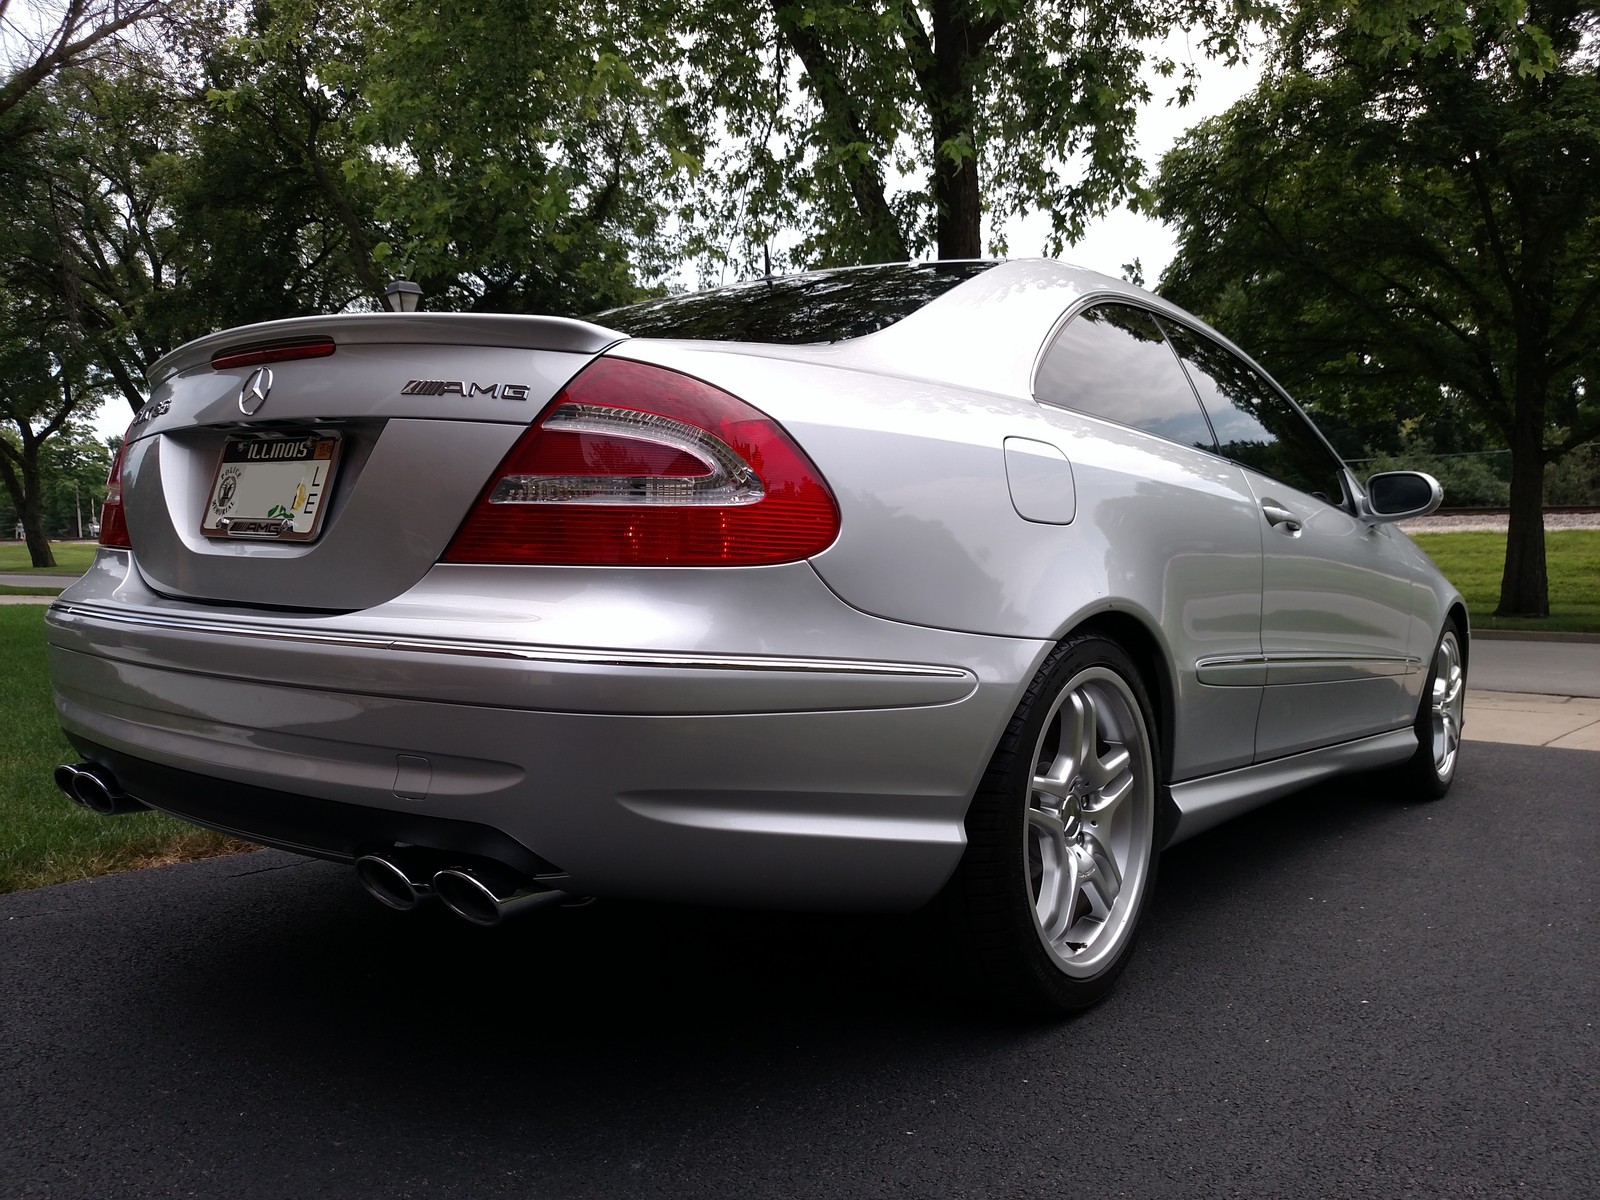 2005 Brilliant Silver Mercedes-Benz CLK55 AMG Coupe picture, mods, upgrades